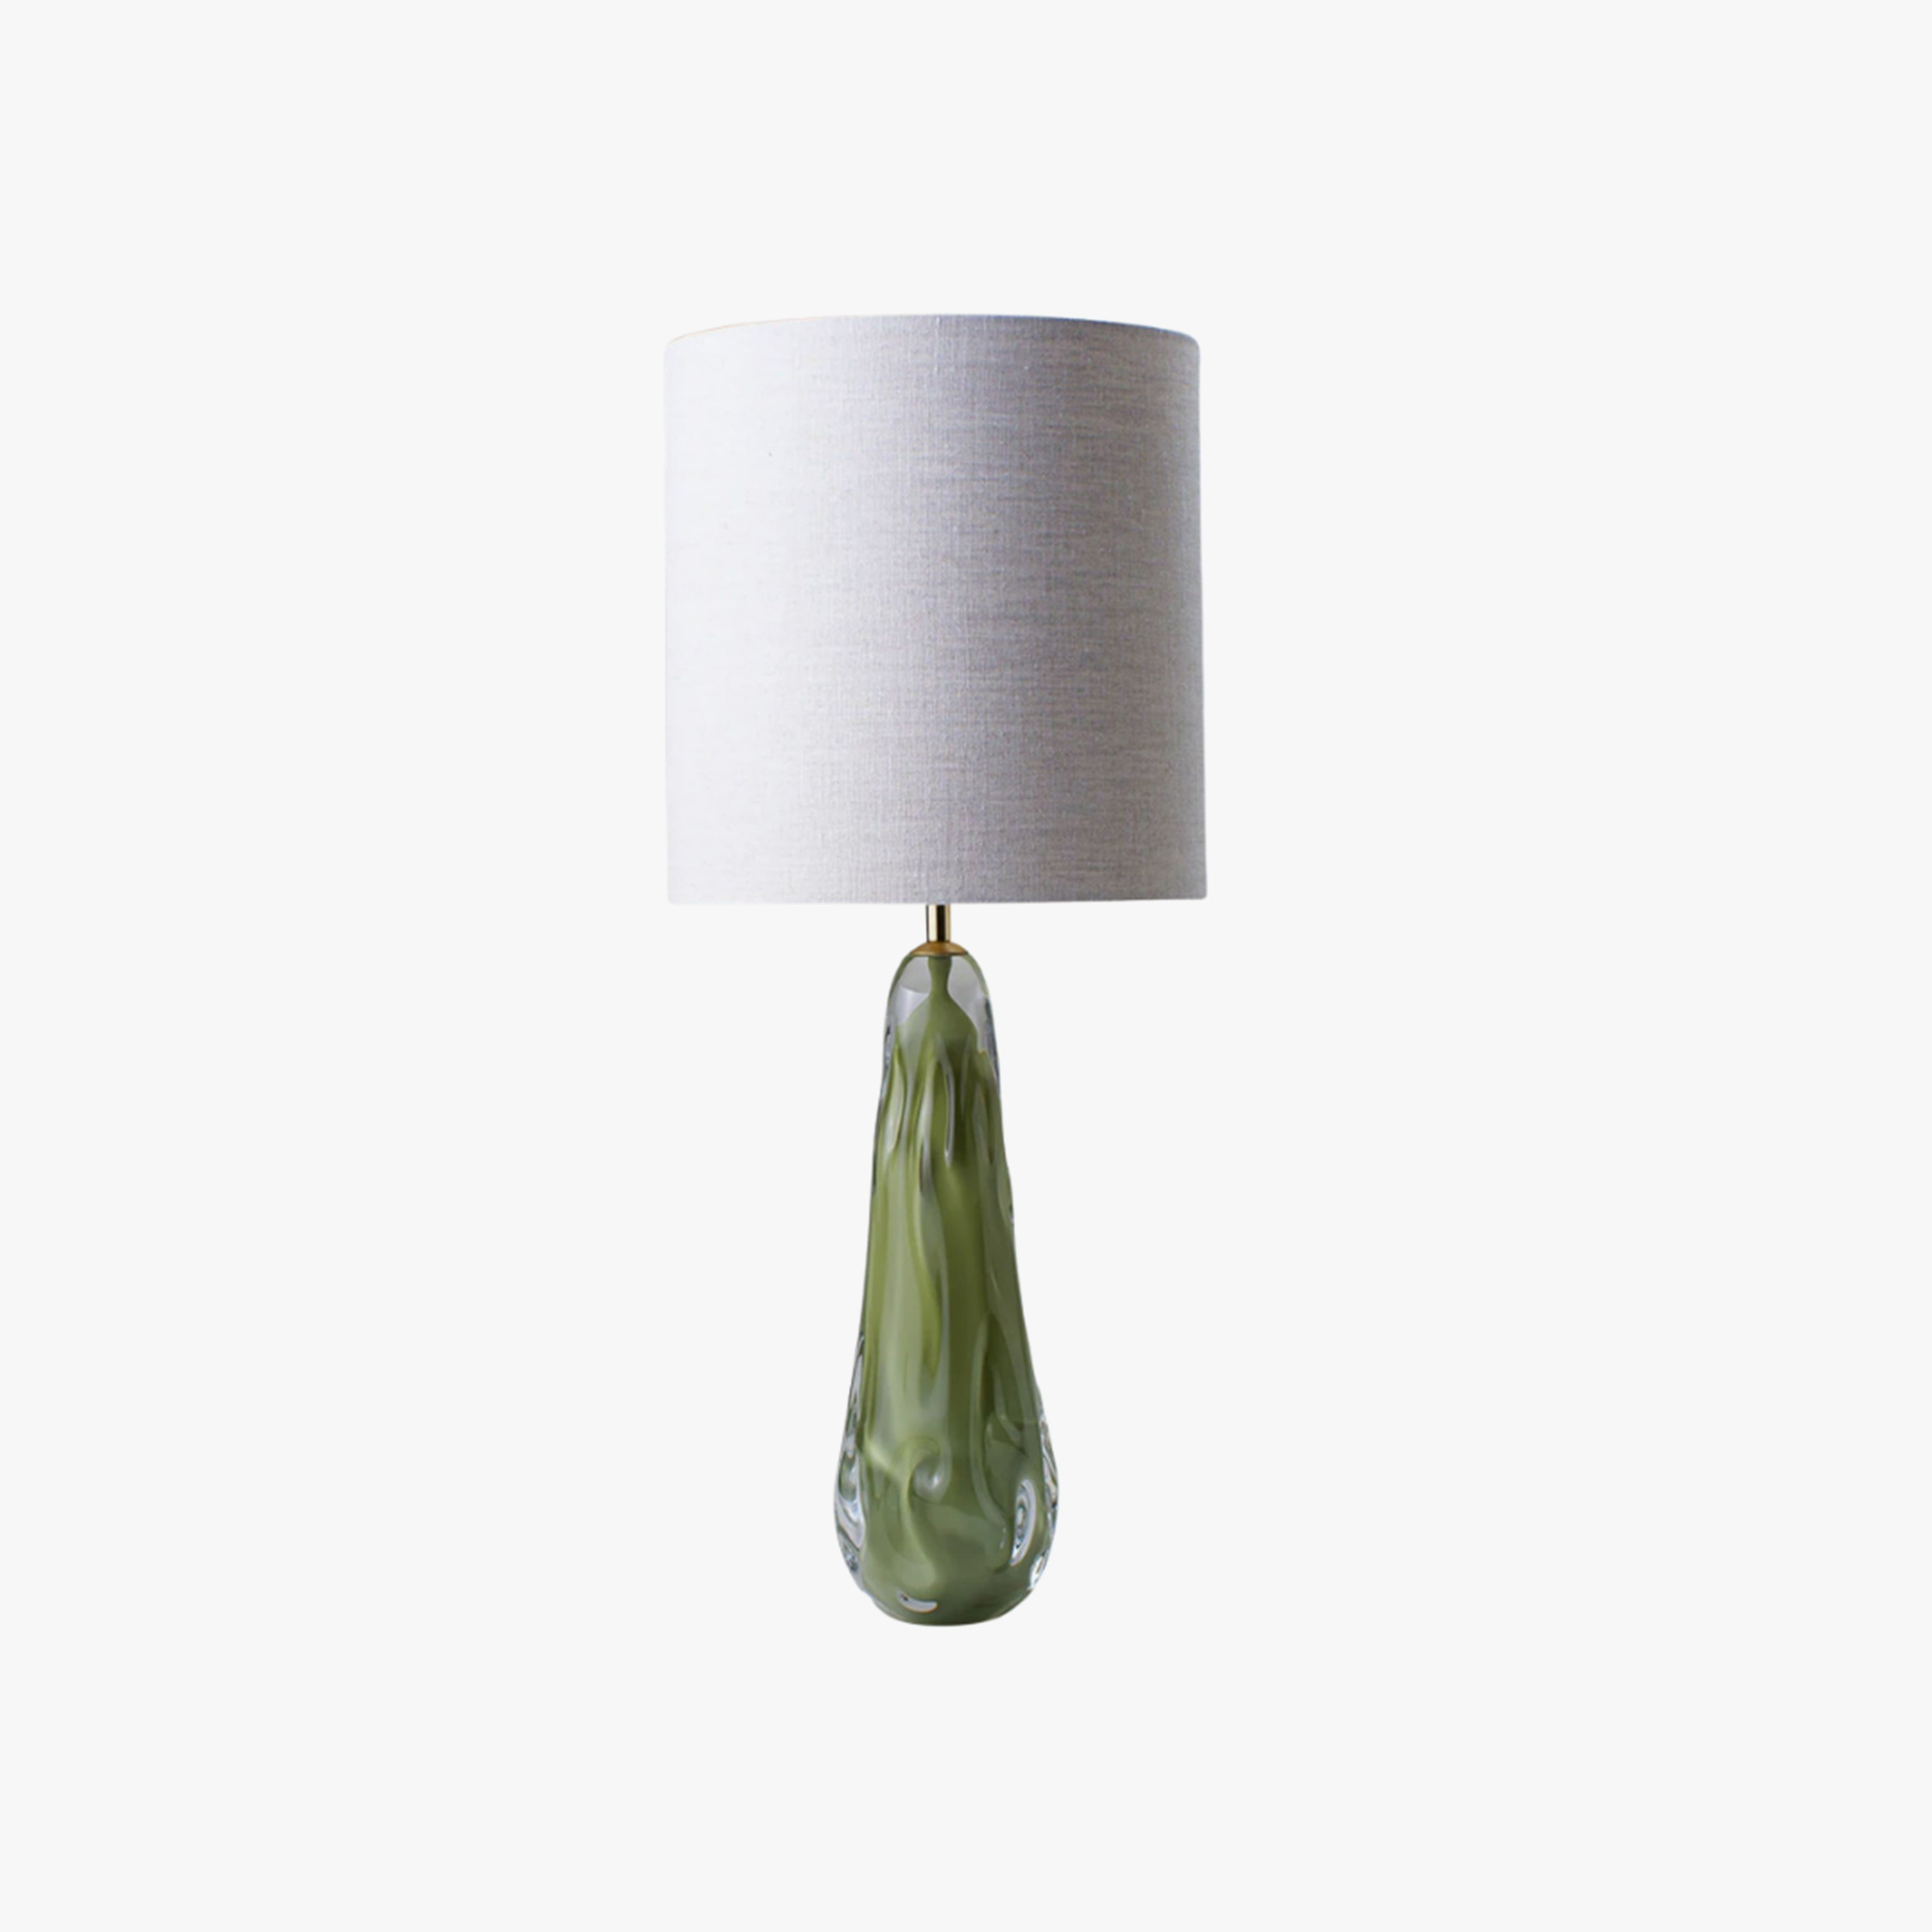 Continentaal verkopen Groot LARGE AVOCADO LAMP by Porta Romana | South Hill Home